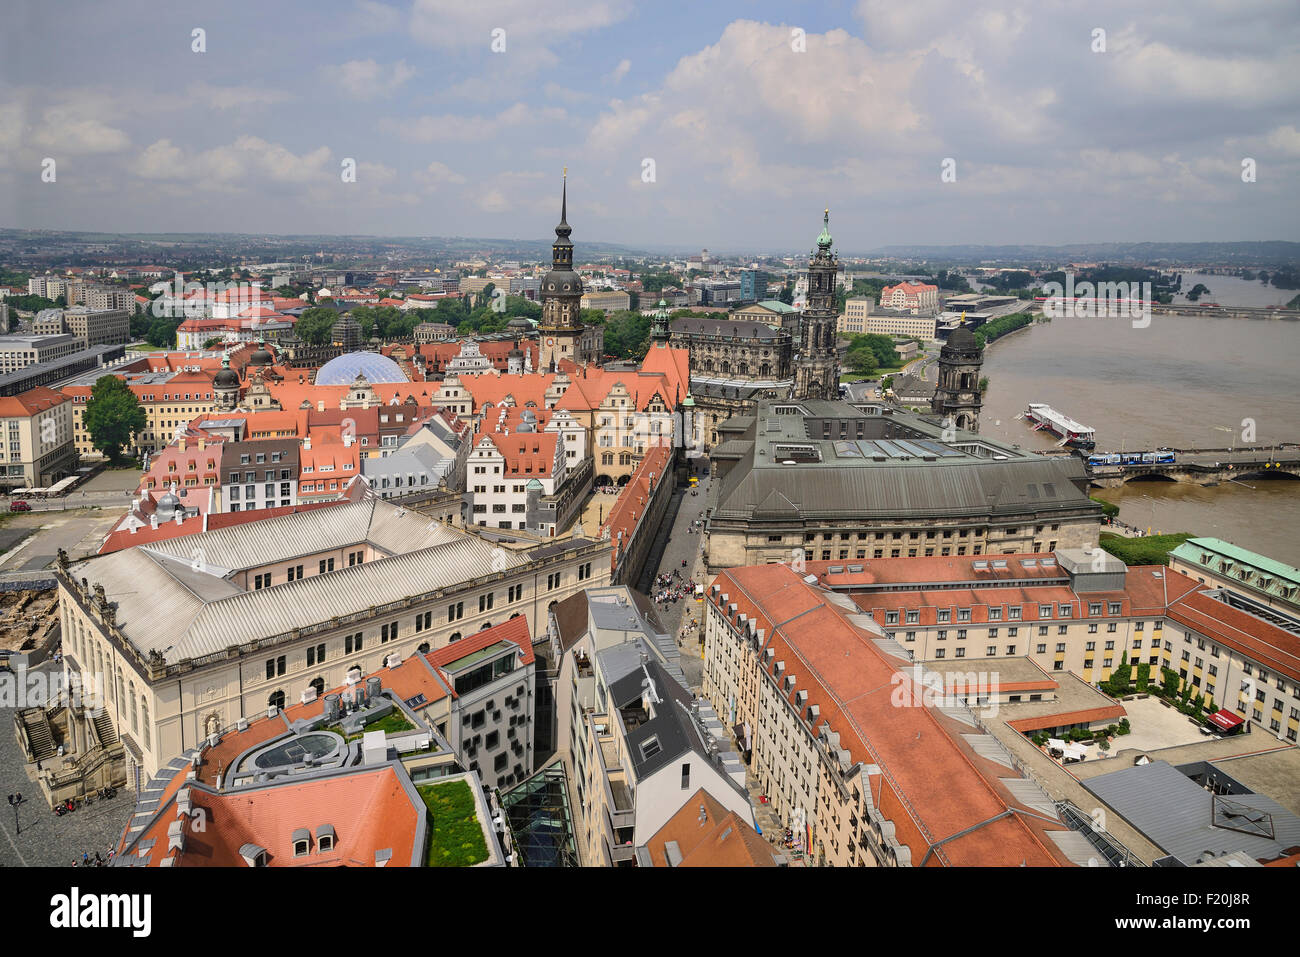 Germany, Saxony, Dresden, View of Dresden and the River Elbe from the dome of Frauenkirche. Stock Photo